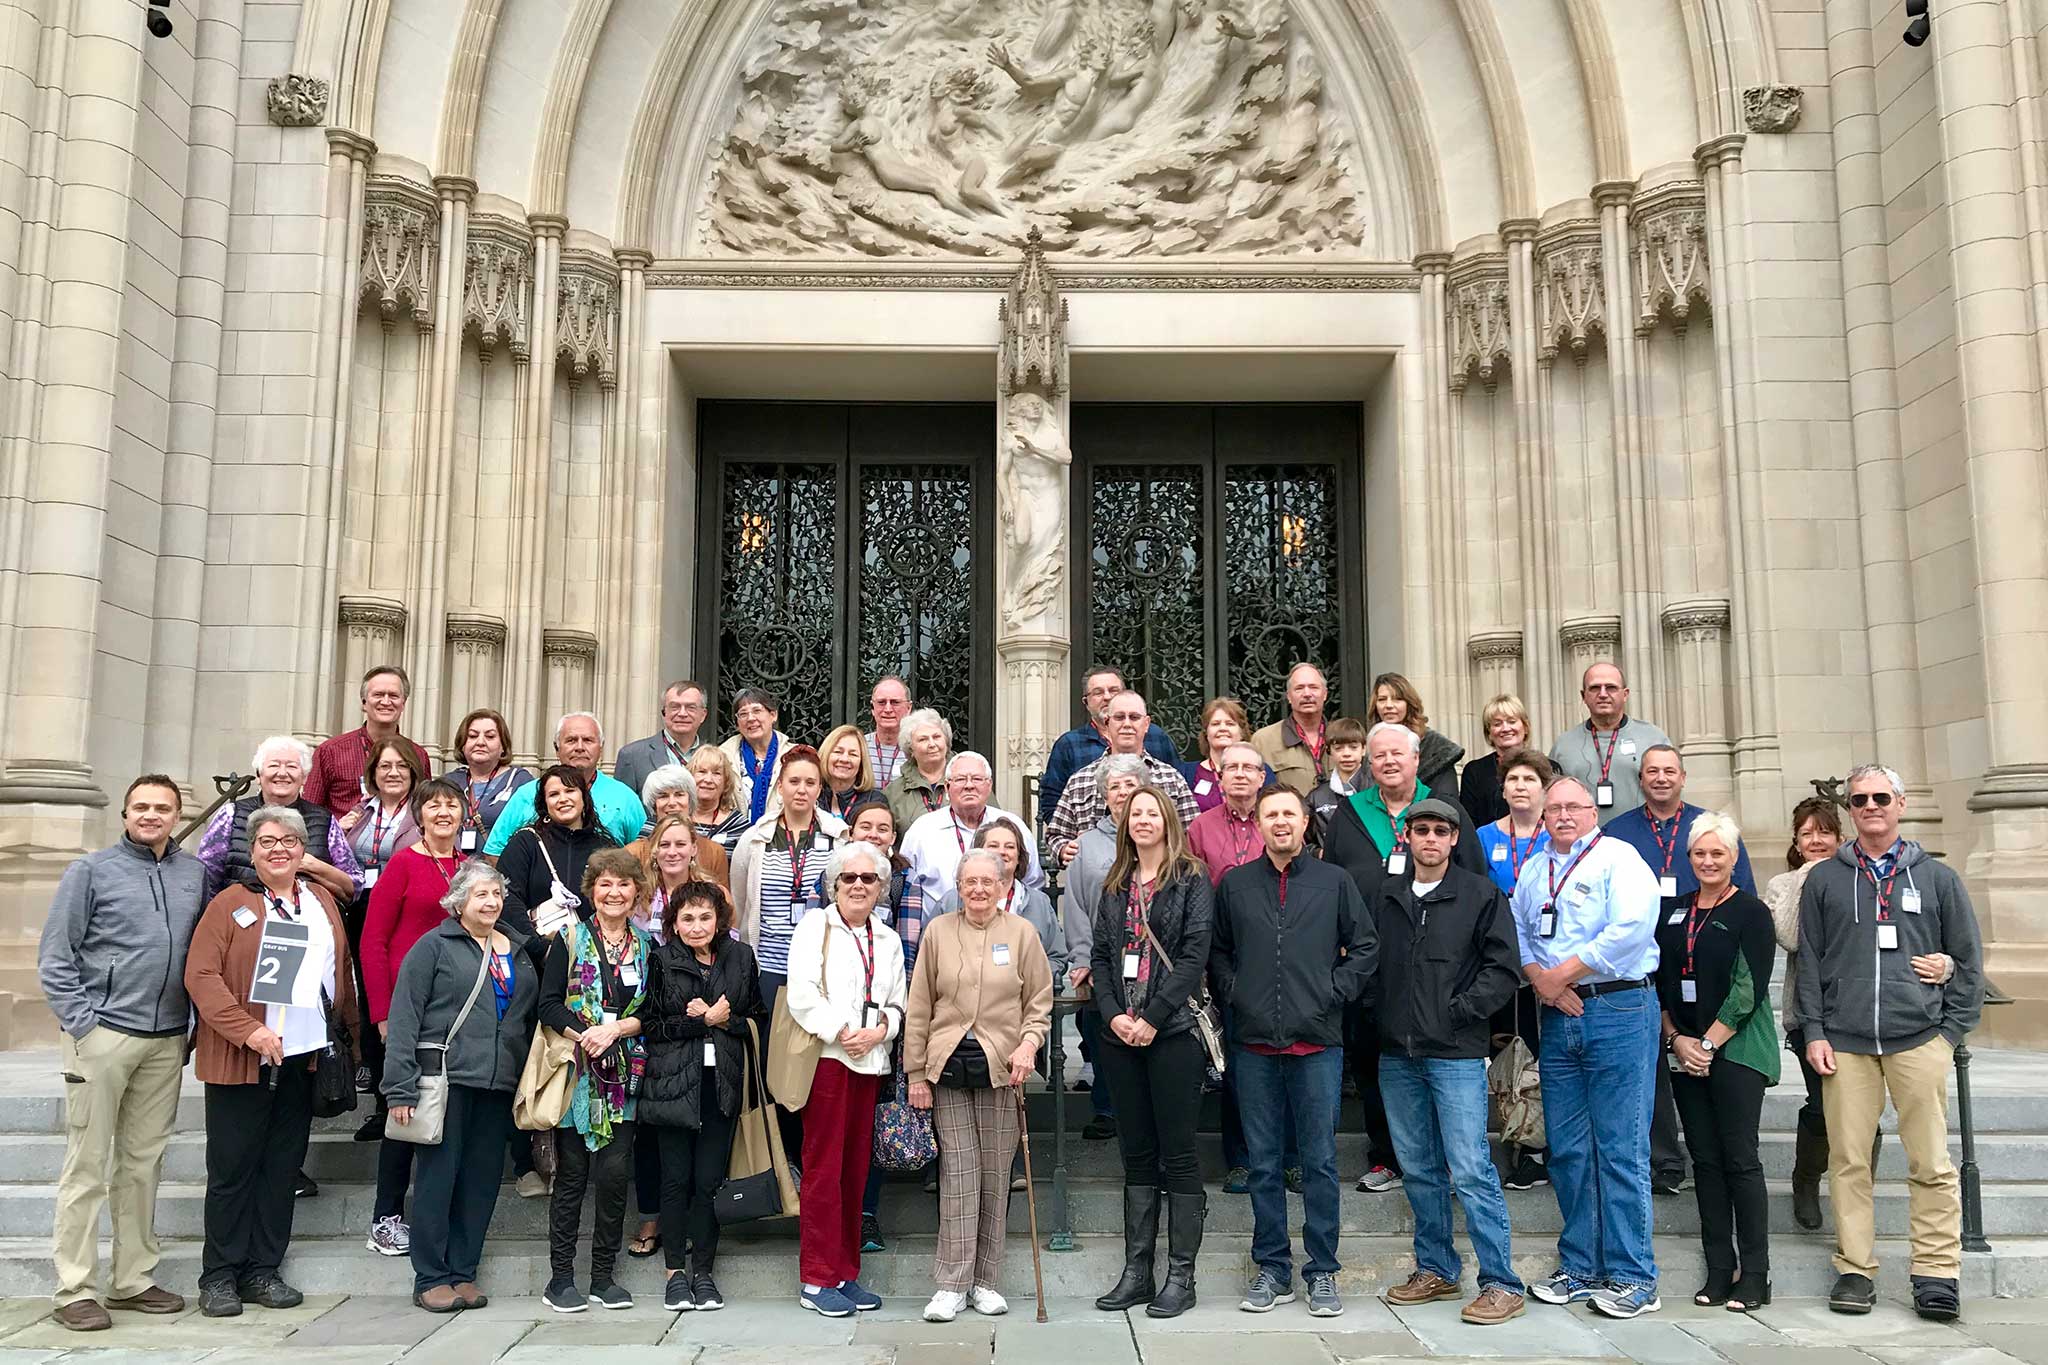 A group of older travelers stand together smiling for the camera in front of the entrance to the National Cathedral in Washington, D.C.